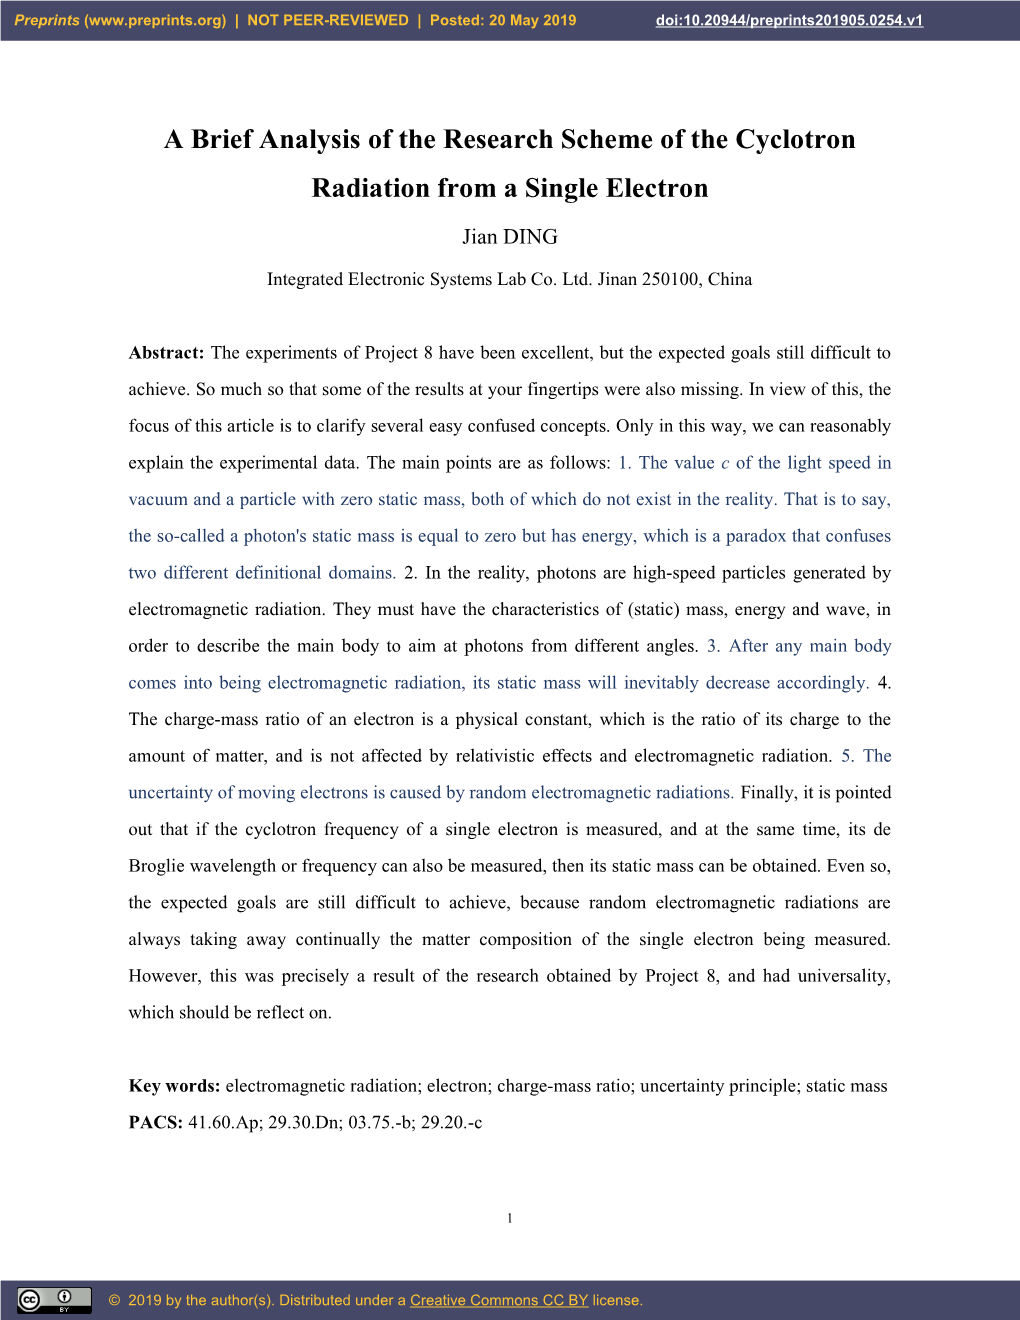 A Brief Analysis of the Research Scheme of the Cyclotron Radiation from a Single Electron